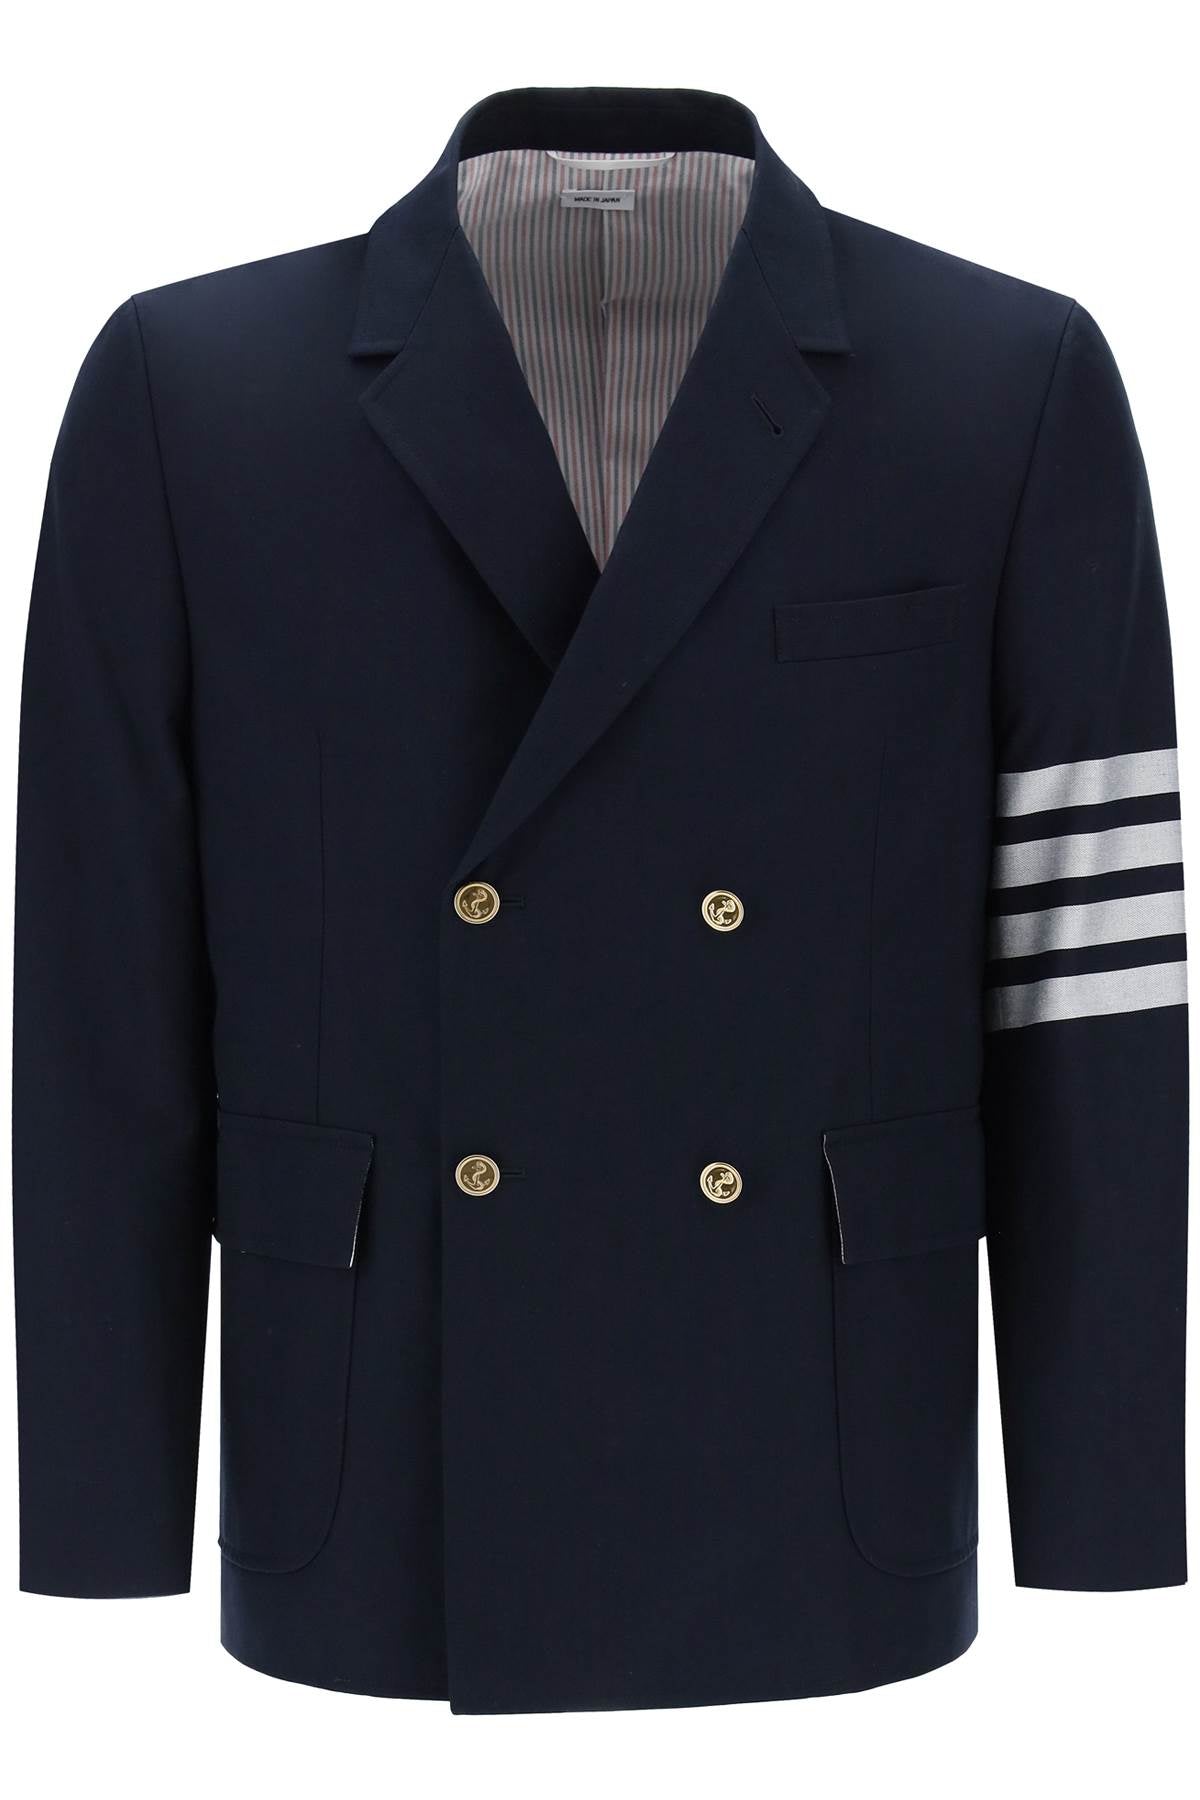 THOM BROWNE Deconstructed Double-Breasted Jacket with Nautical Button Detail